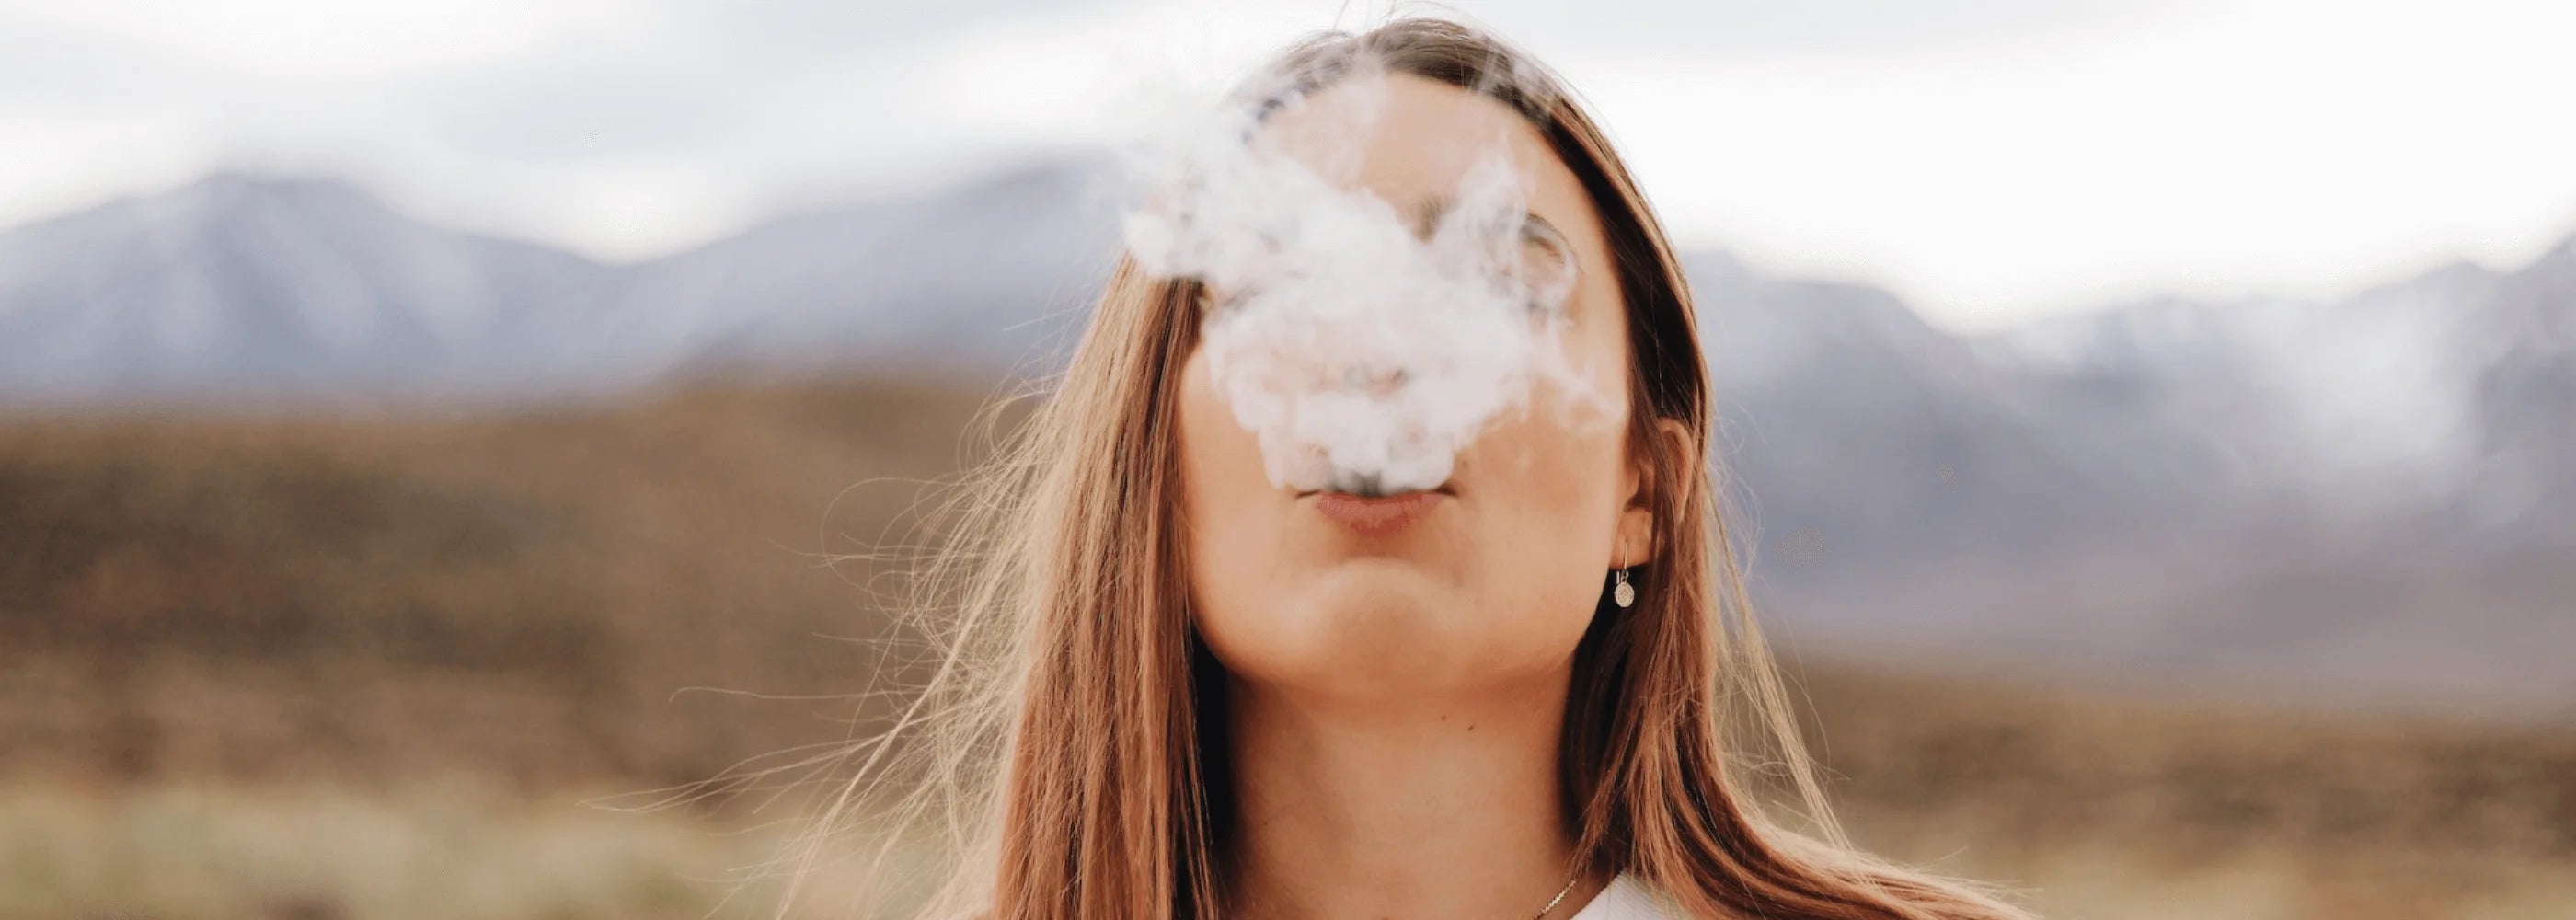 a blond girl exhaling a big puff with mountains in the background